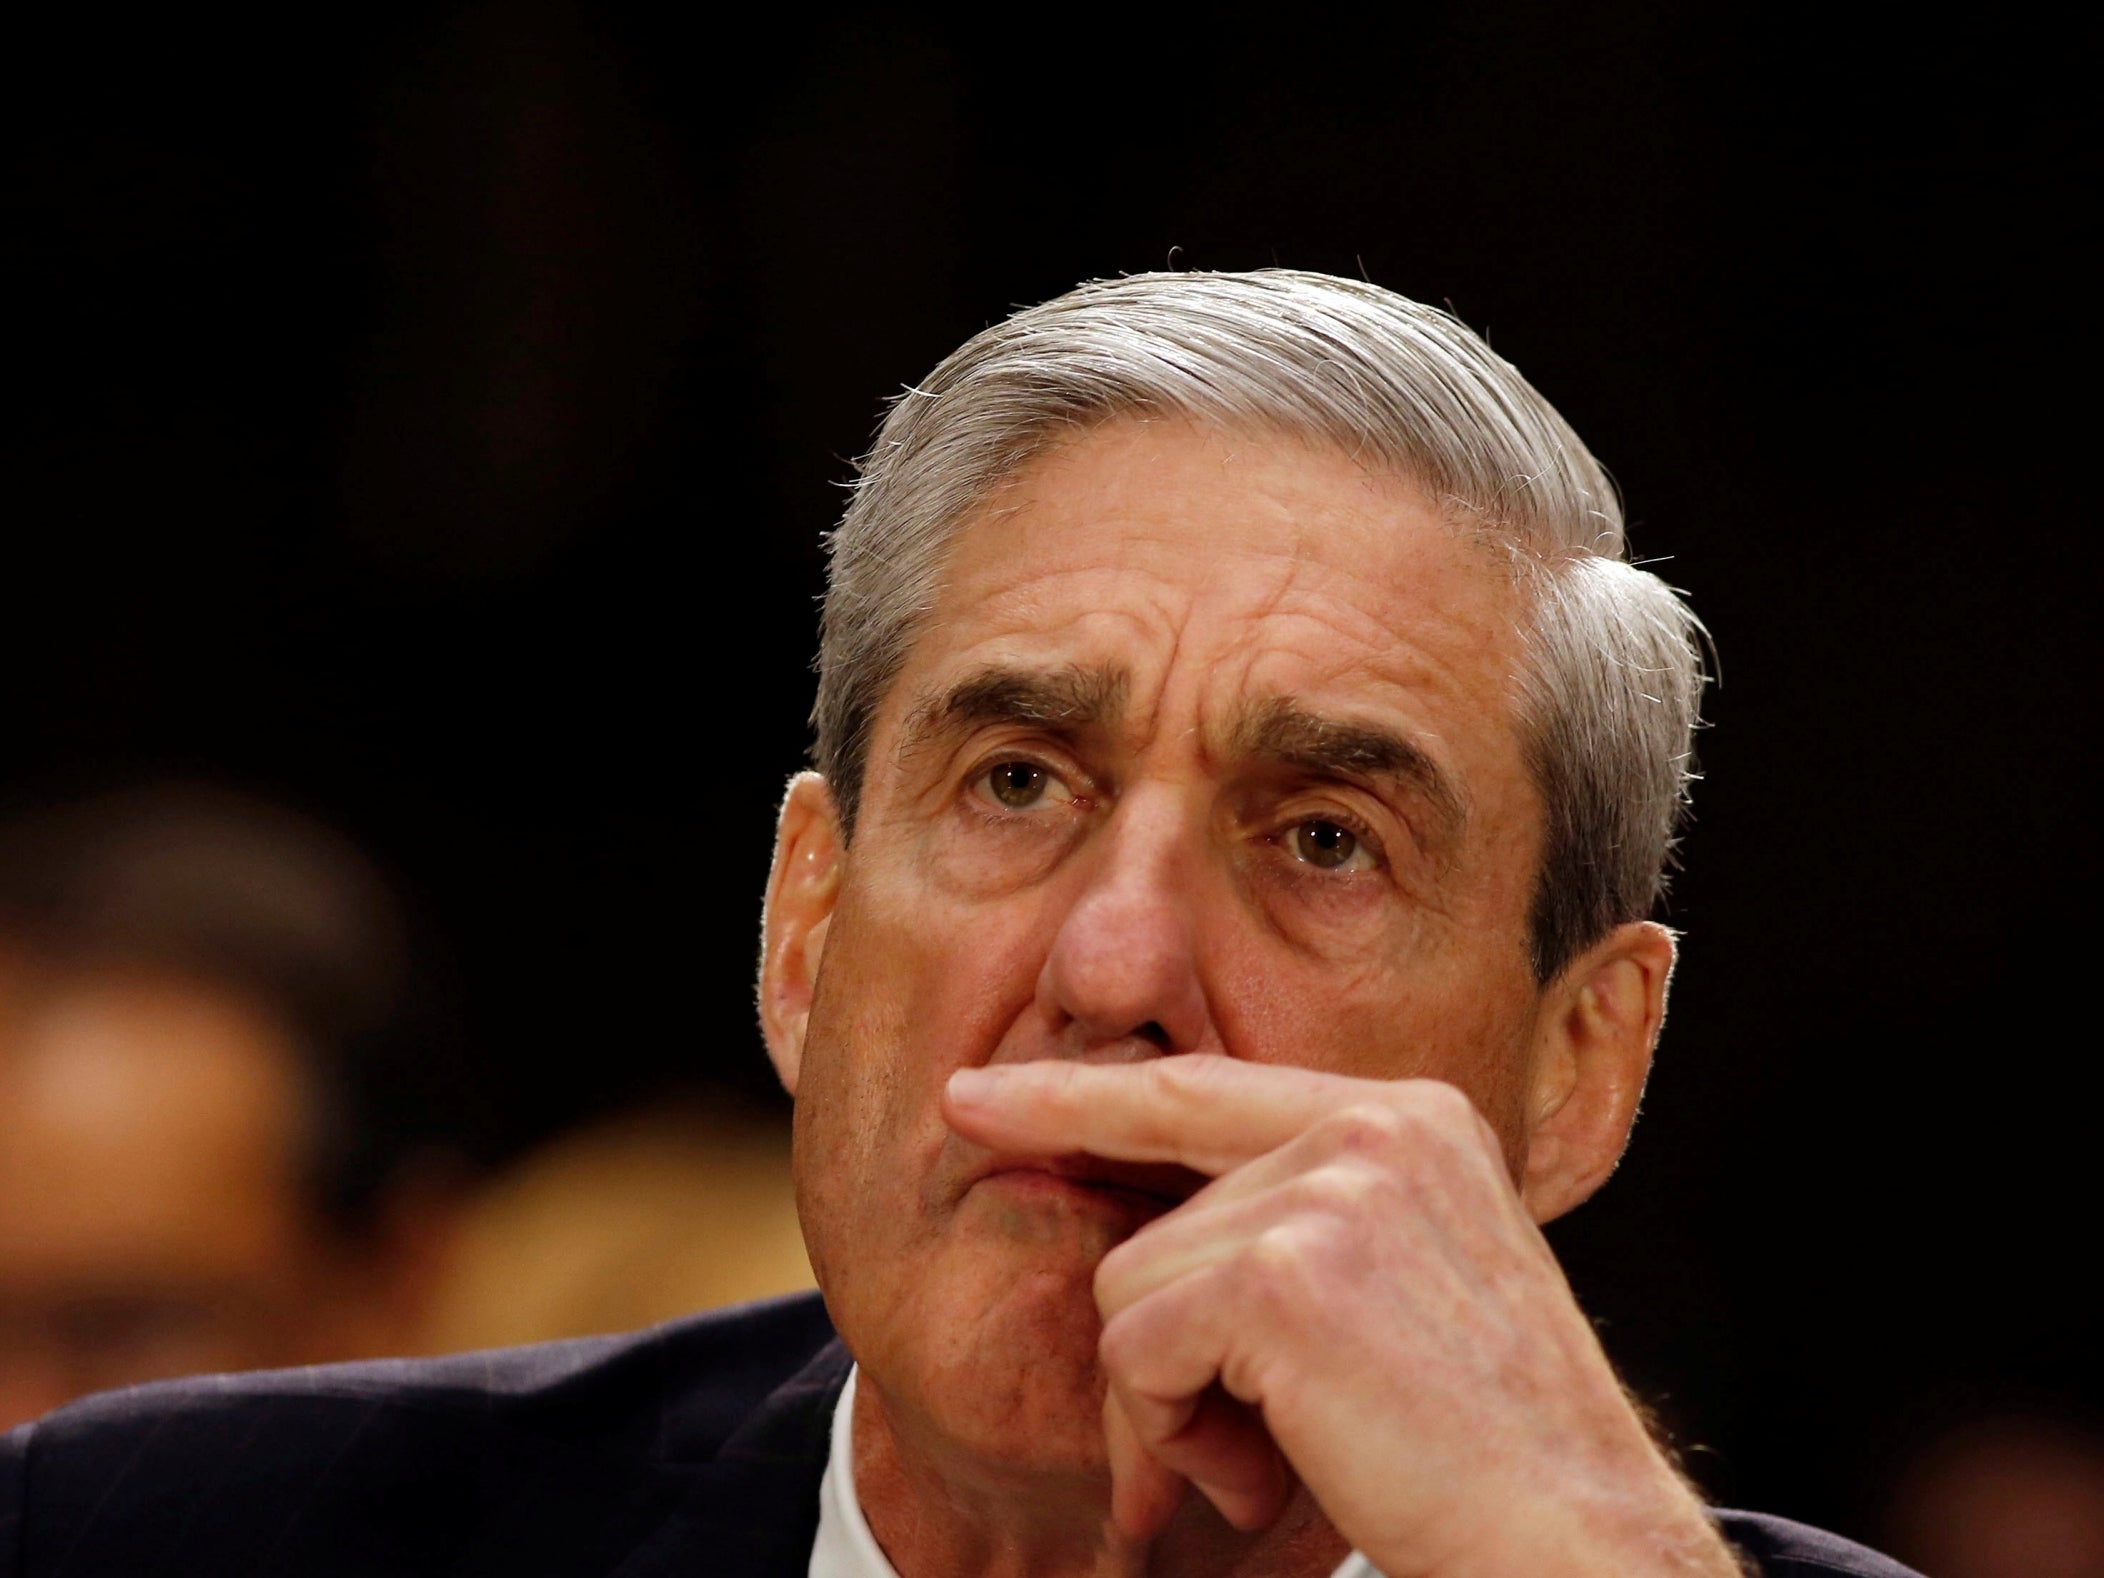 Mueller report: Everything we know about the mystery foreign company under scrutiny